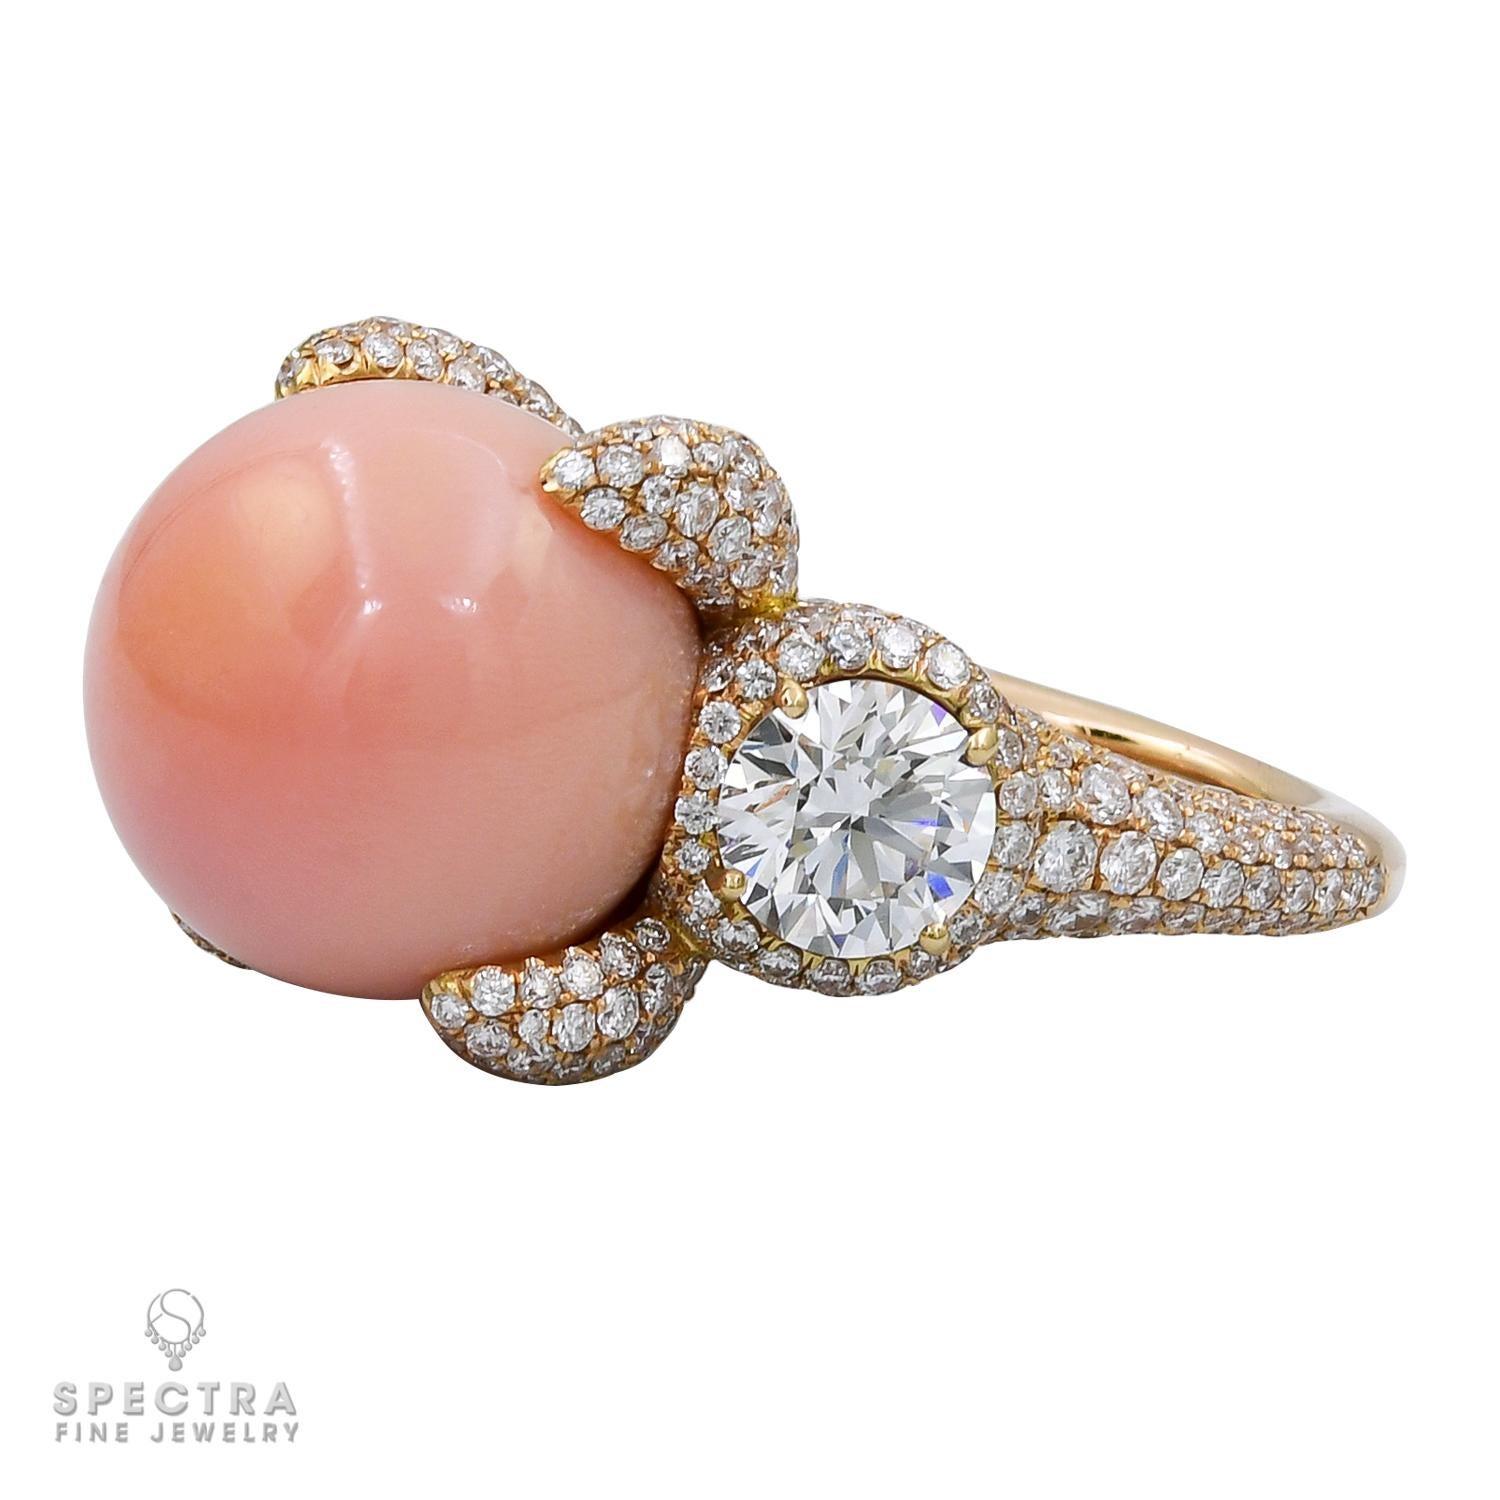 The Conch Pearl Diamond Cocktail Ring, made by Spectra Fine Jewelry, is a captivating piece that seamlessly blends elegance with contemporary design. This stunning ring features a harmonious combination of rare elements, showcasing a magnificent